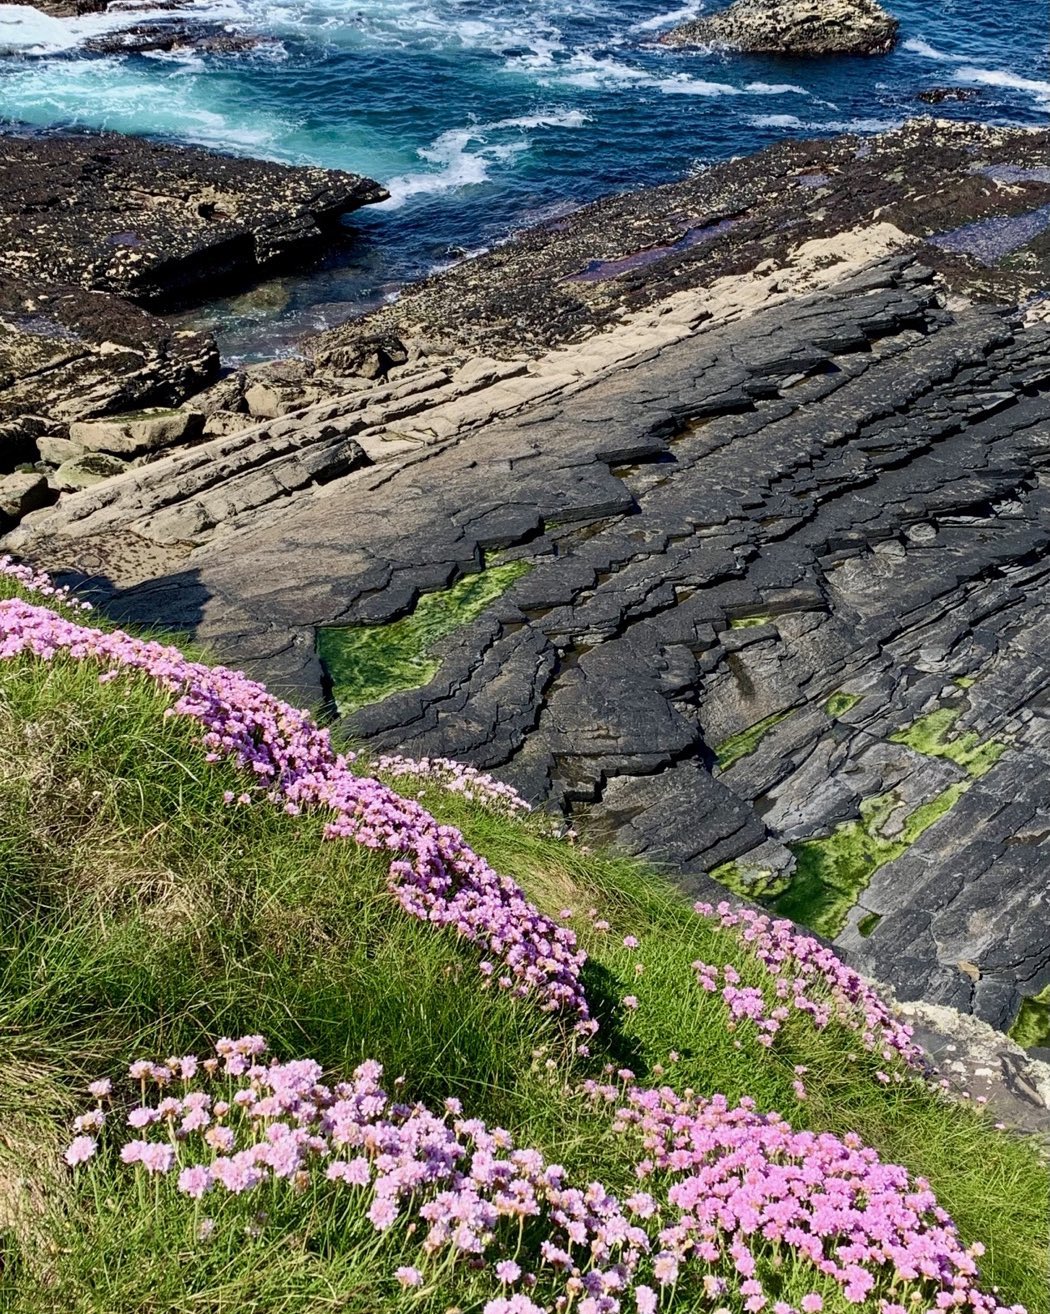 Walk along to top of the Cliffs of Moher in Ireland today. Sea pink and eroded limestone. Note the saw tooth pattern in the rock layers. #cliffsofmoher #seapink #orcuttphotography doolinireland burren&cliffsofmoherUNESCOglobalgeopark #northcountyclareireland